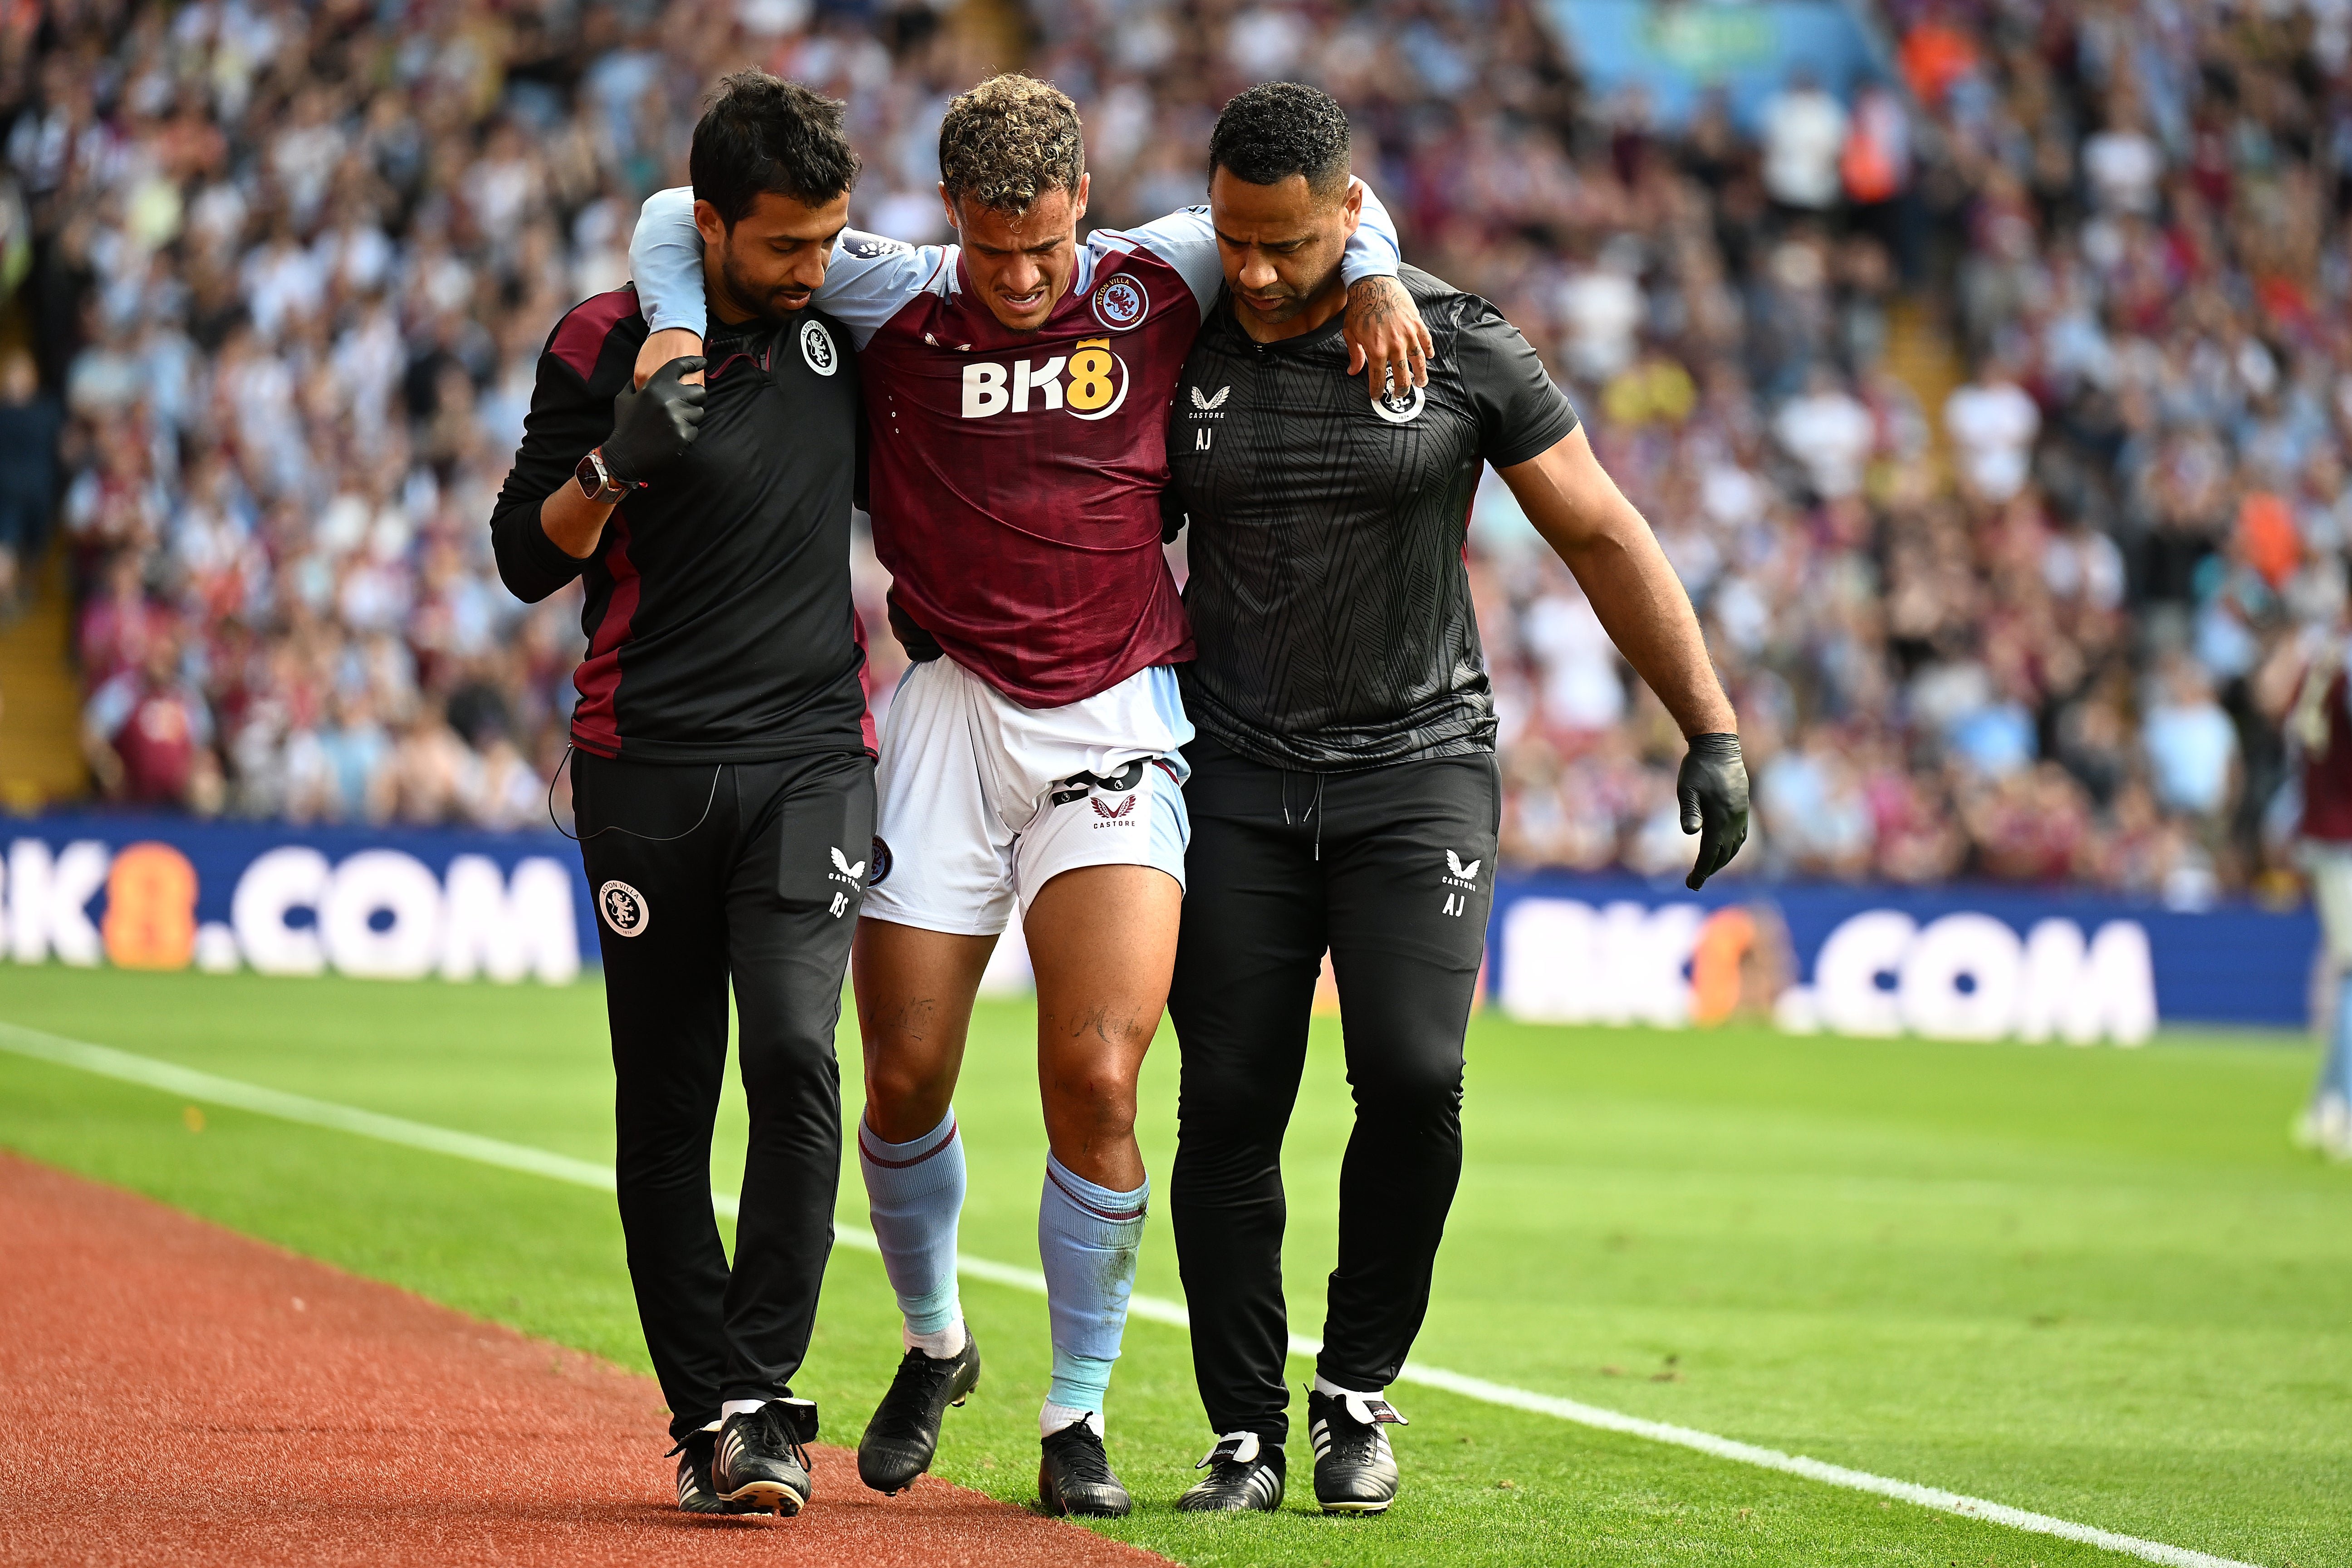 Coutinho had to leave the field due to injury during Aston Villa’s dominant victory